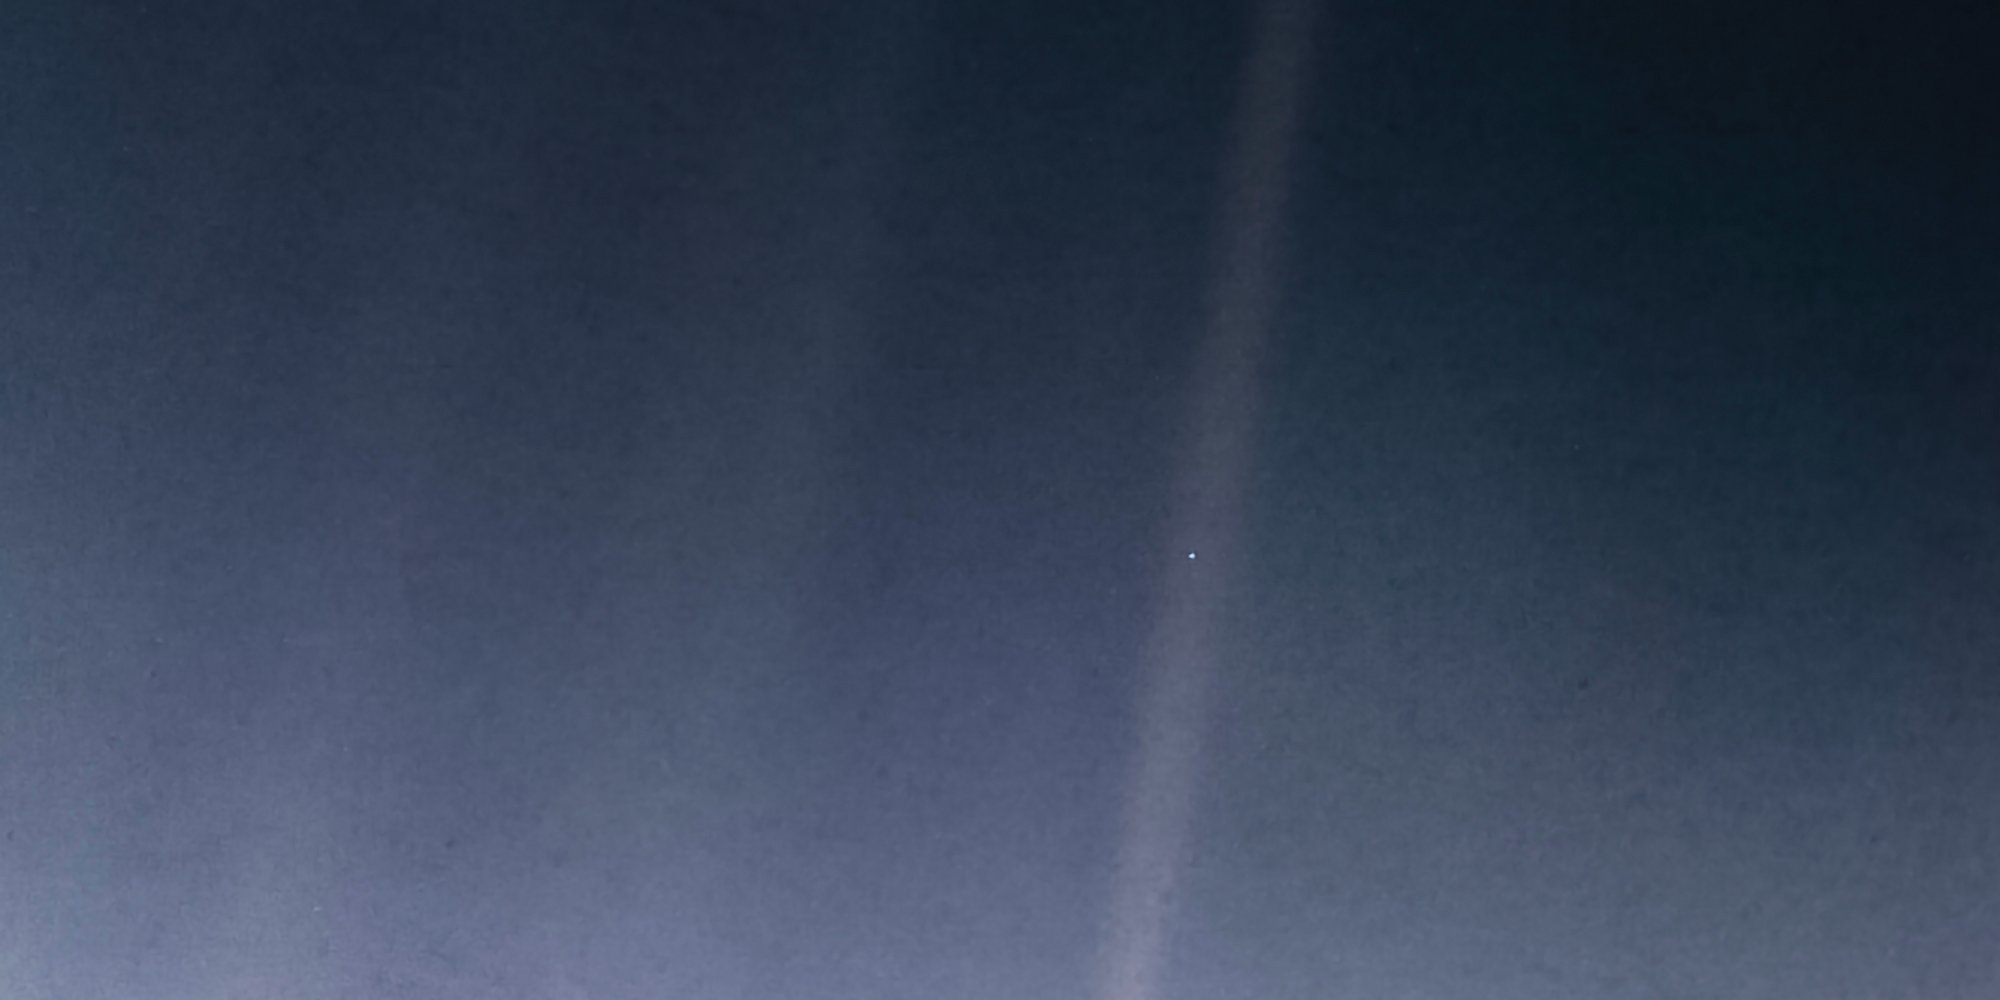 Pale Blue Dot photo taken by Voyager 1 in 1990